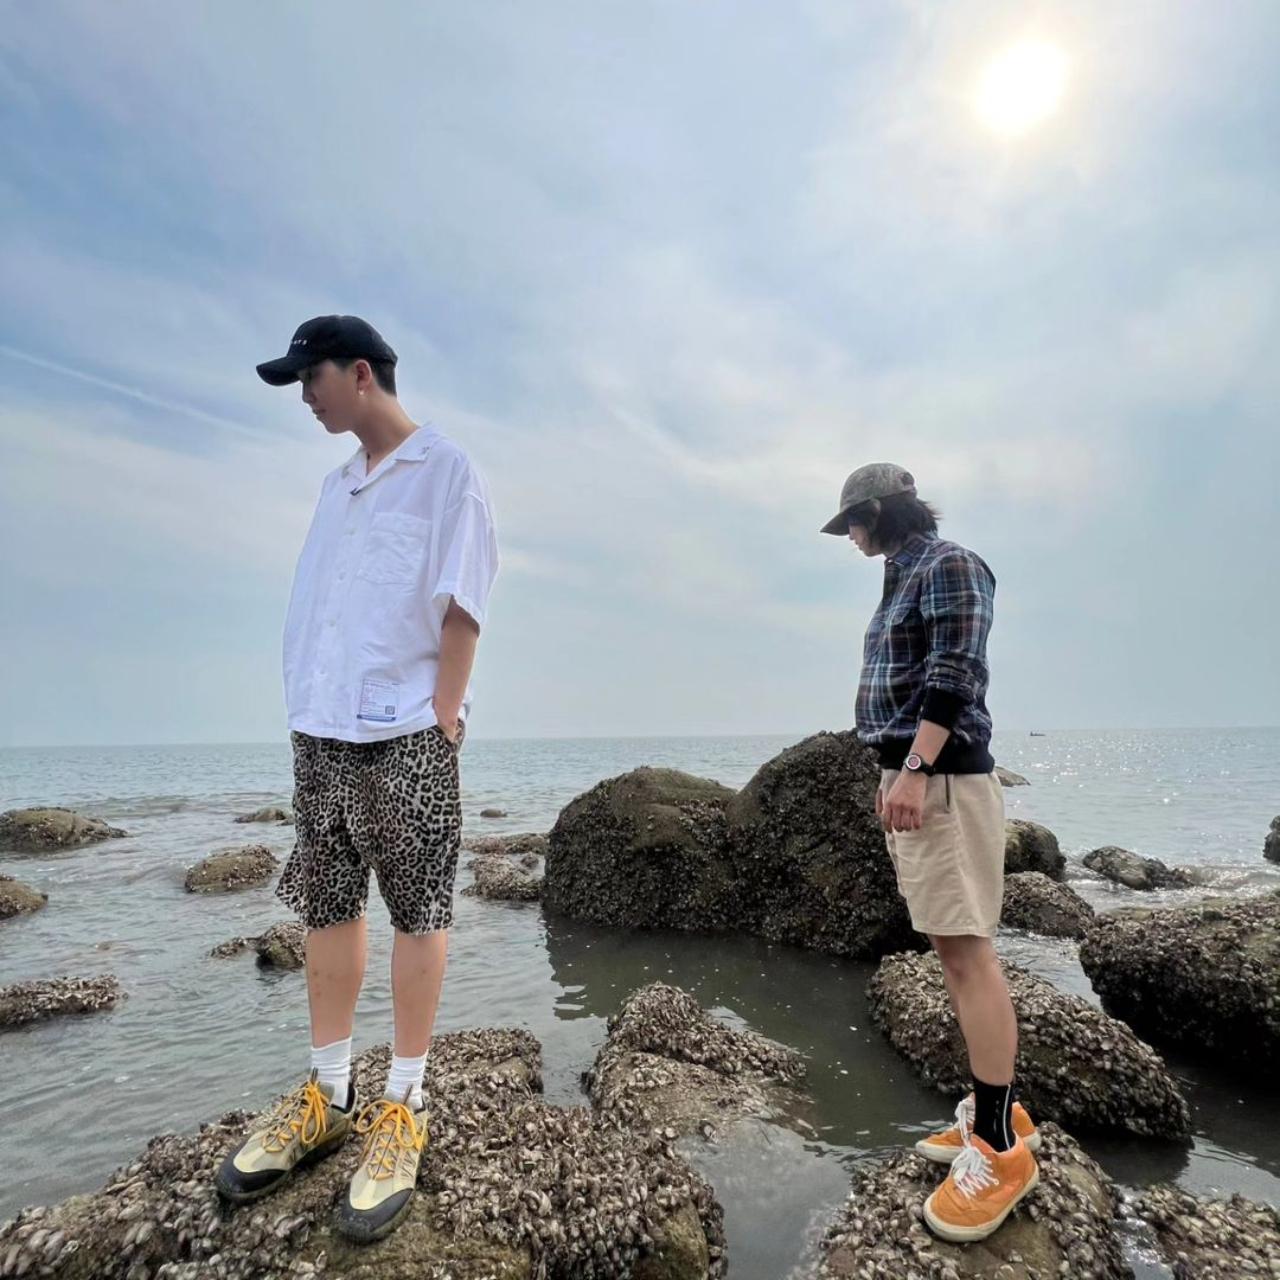 In a rare occurence, Namjoon is dressed flamboyantly in his white shirt and leopard-print shorts (we think its Seokjin's influence). He seems to be on the hunt for crabs at sea (as usual)